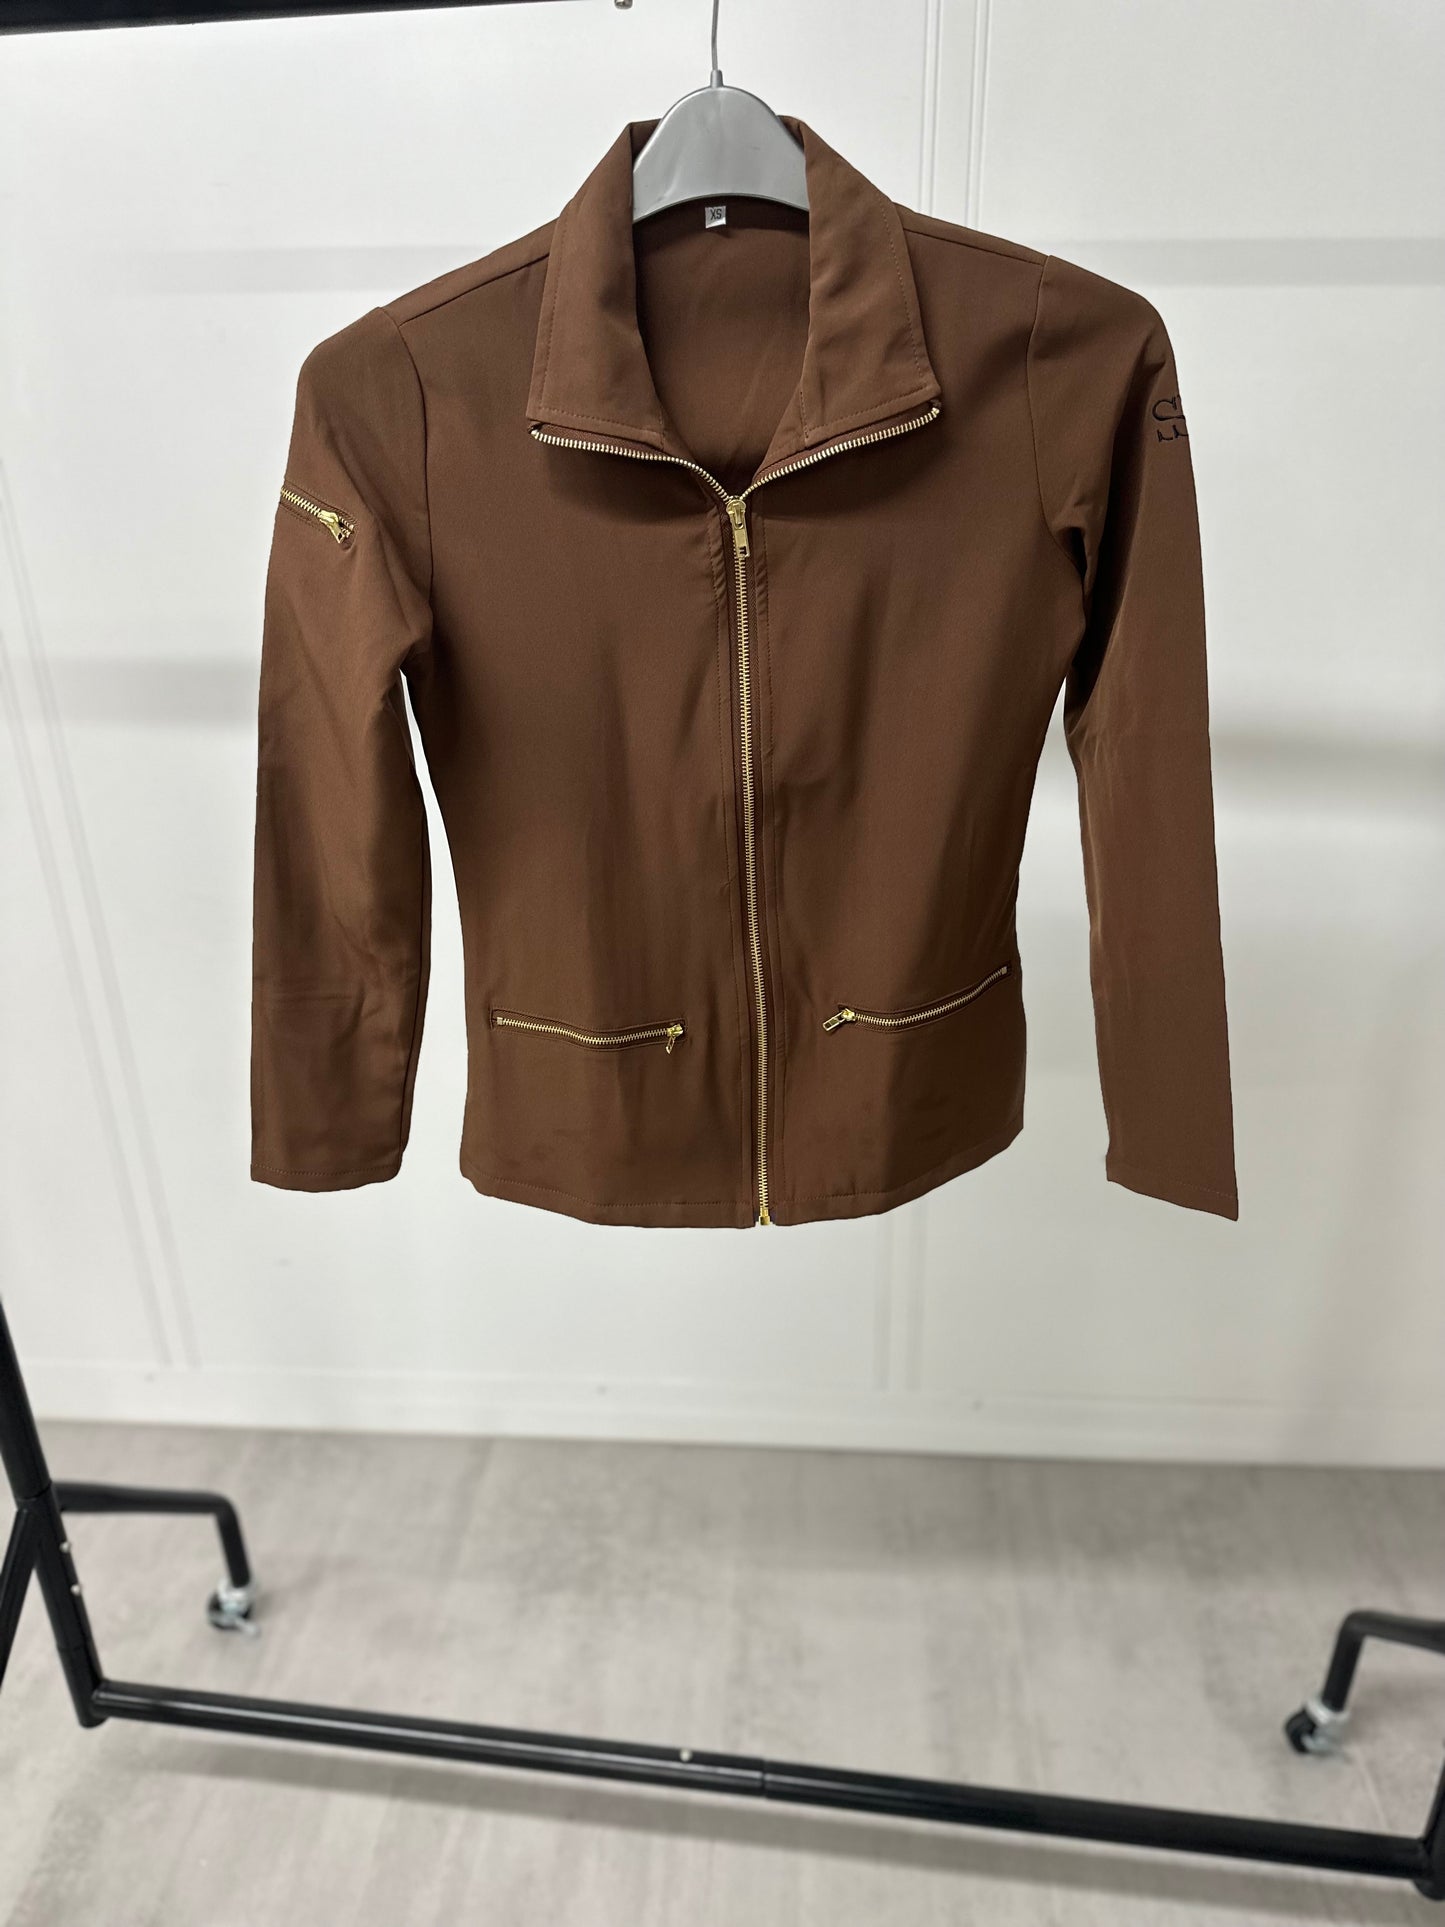 Deluxe jacket in chocolate 🤎 - Swankysets